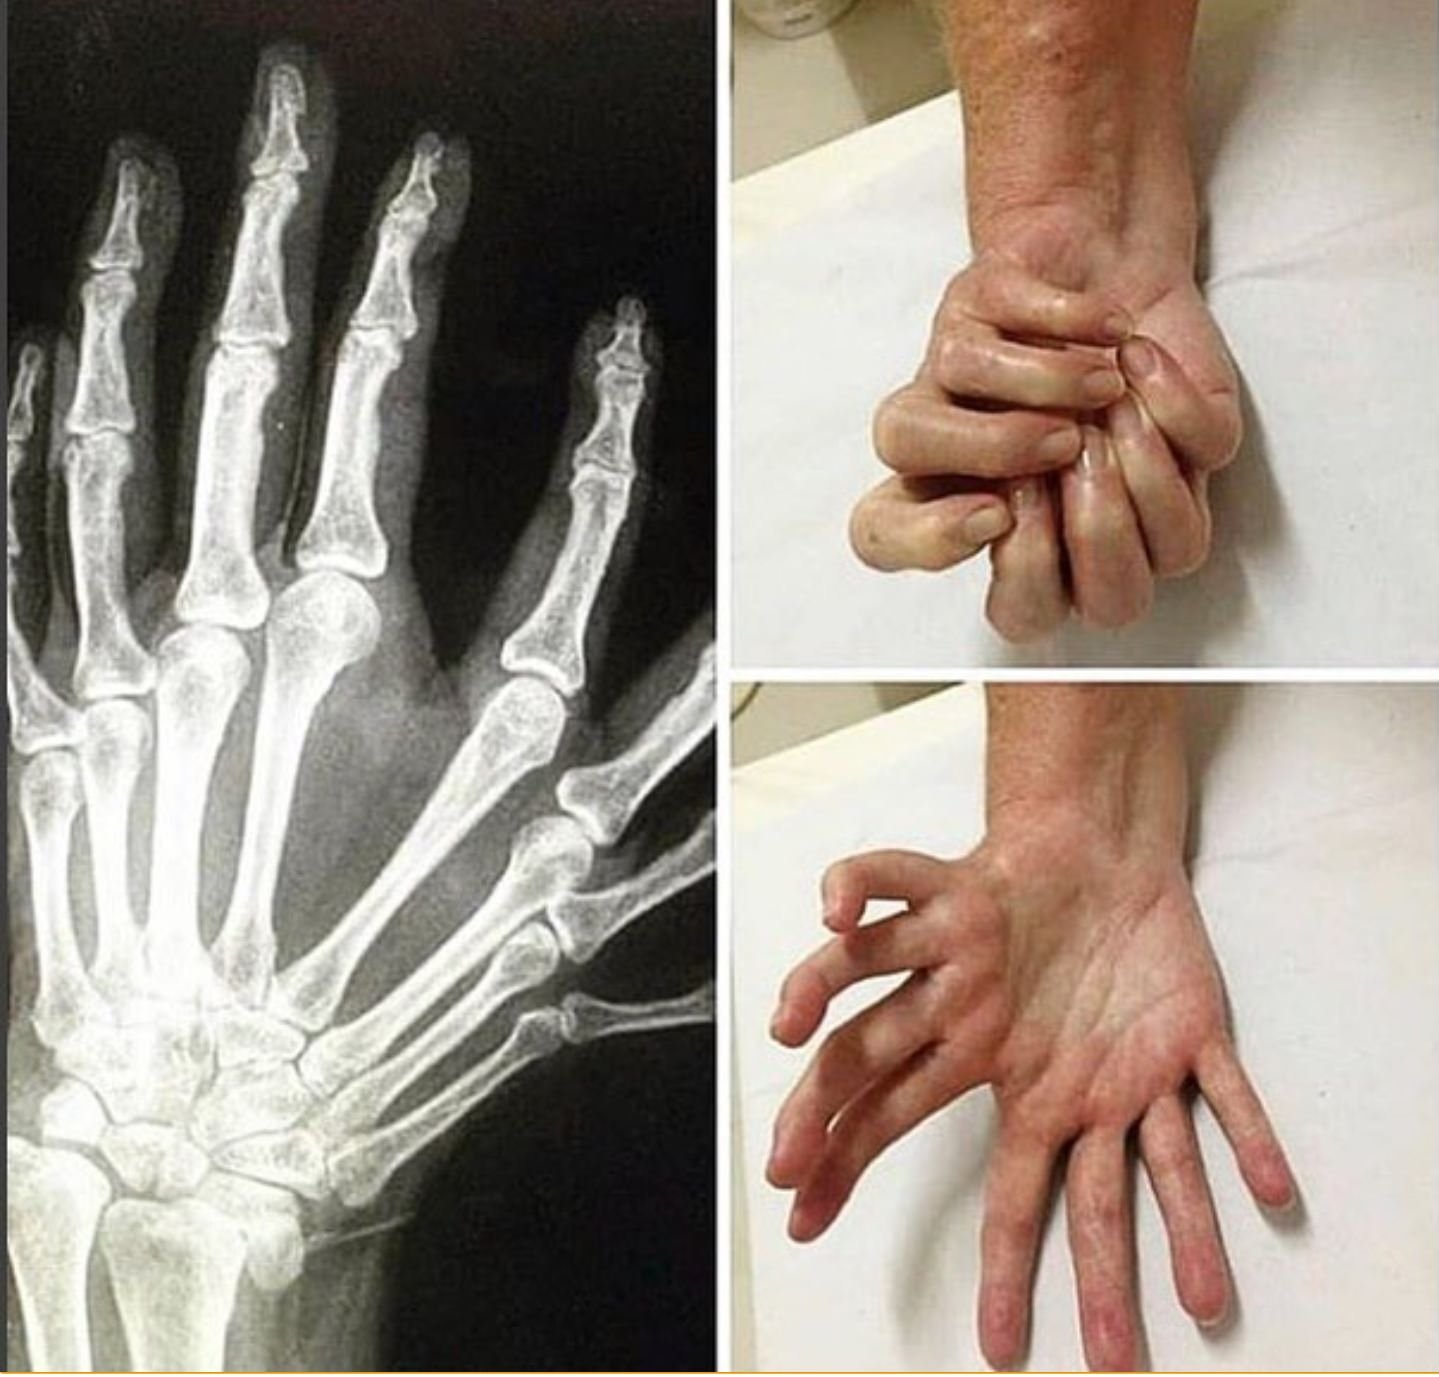 mirror hand syndrome